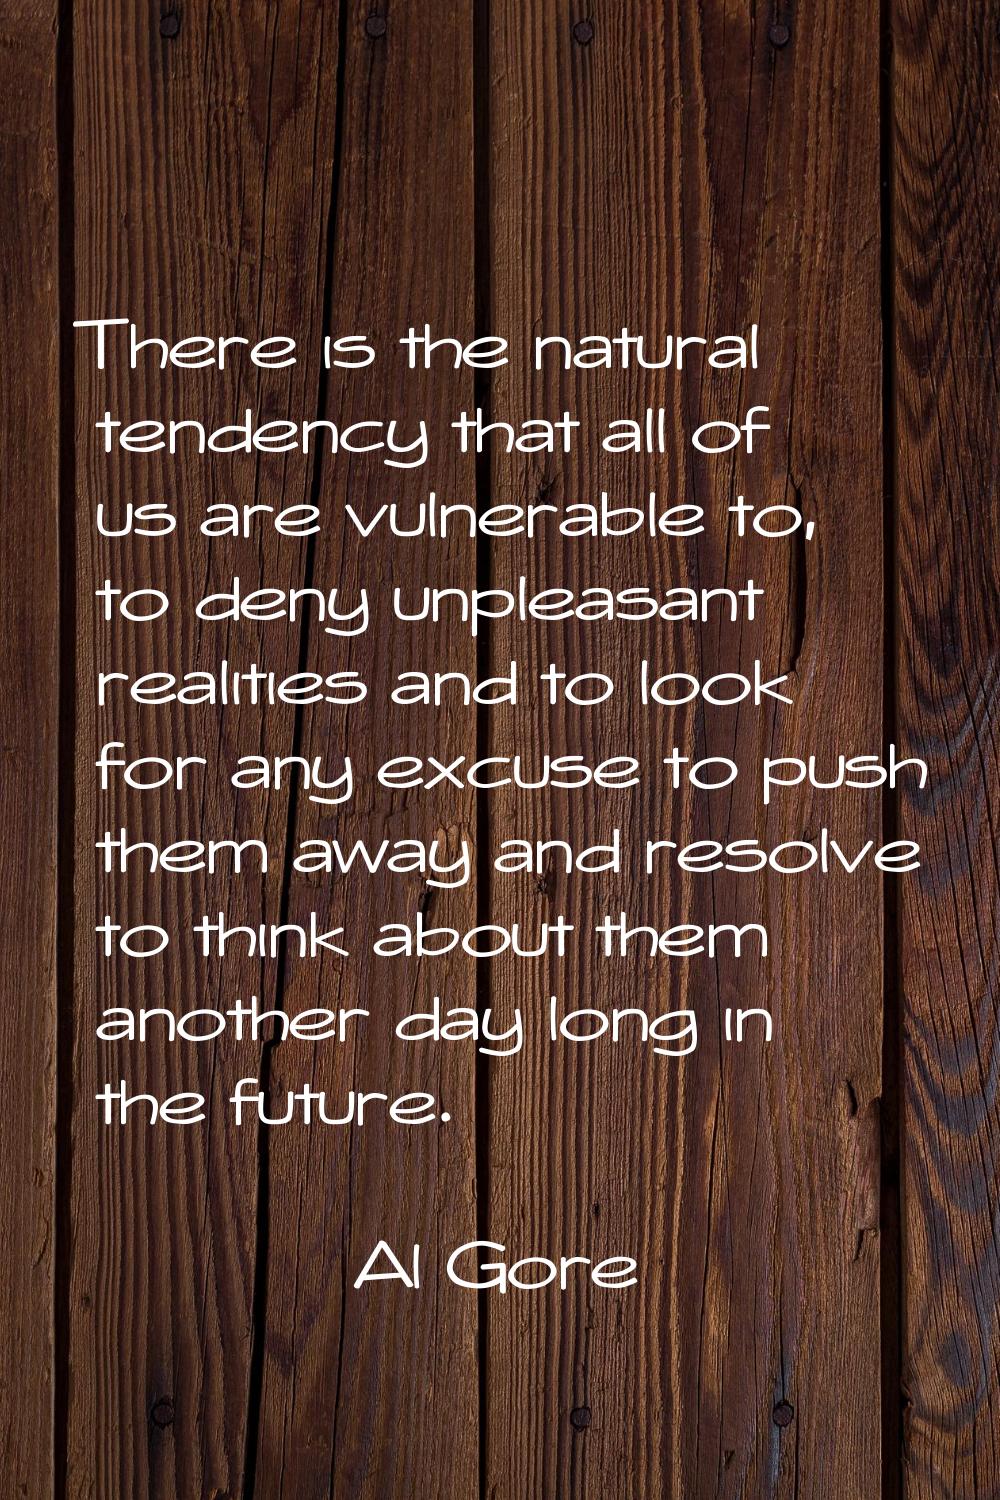 There is the natural tendency that all of us are vulnerable to, to deny unpleasant realities and to